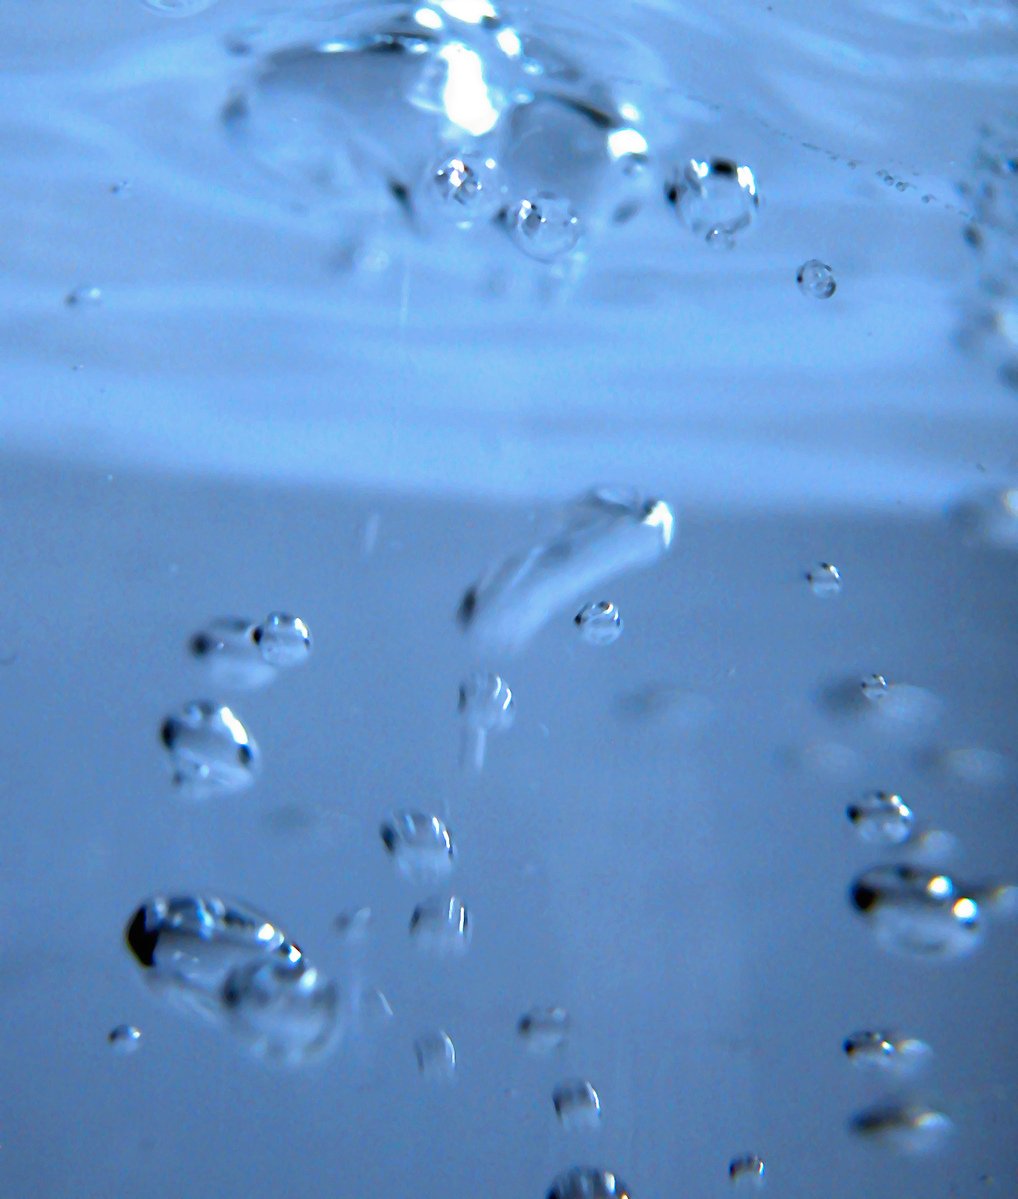 water bubbles floating in a blue tone po